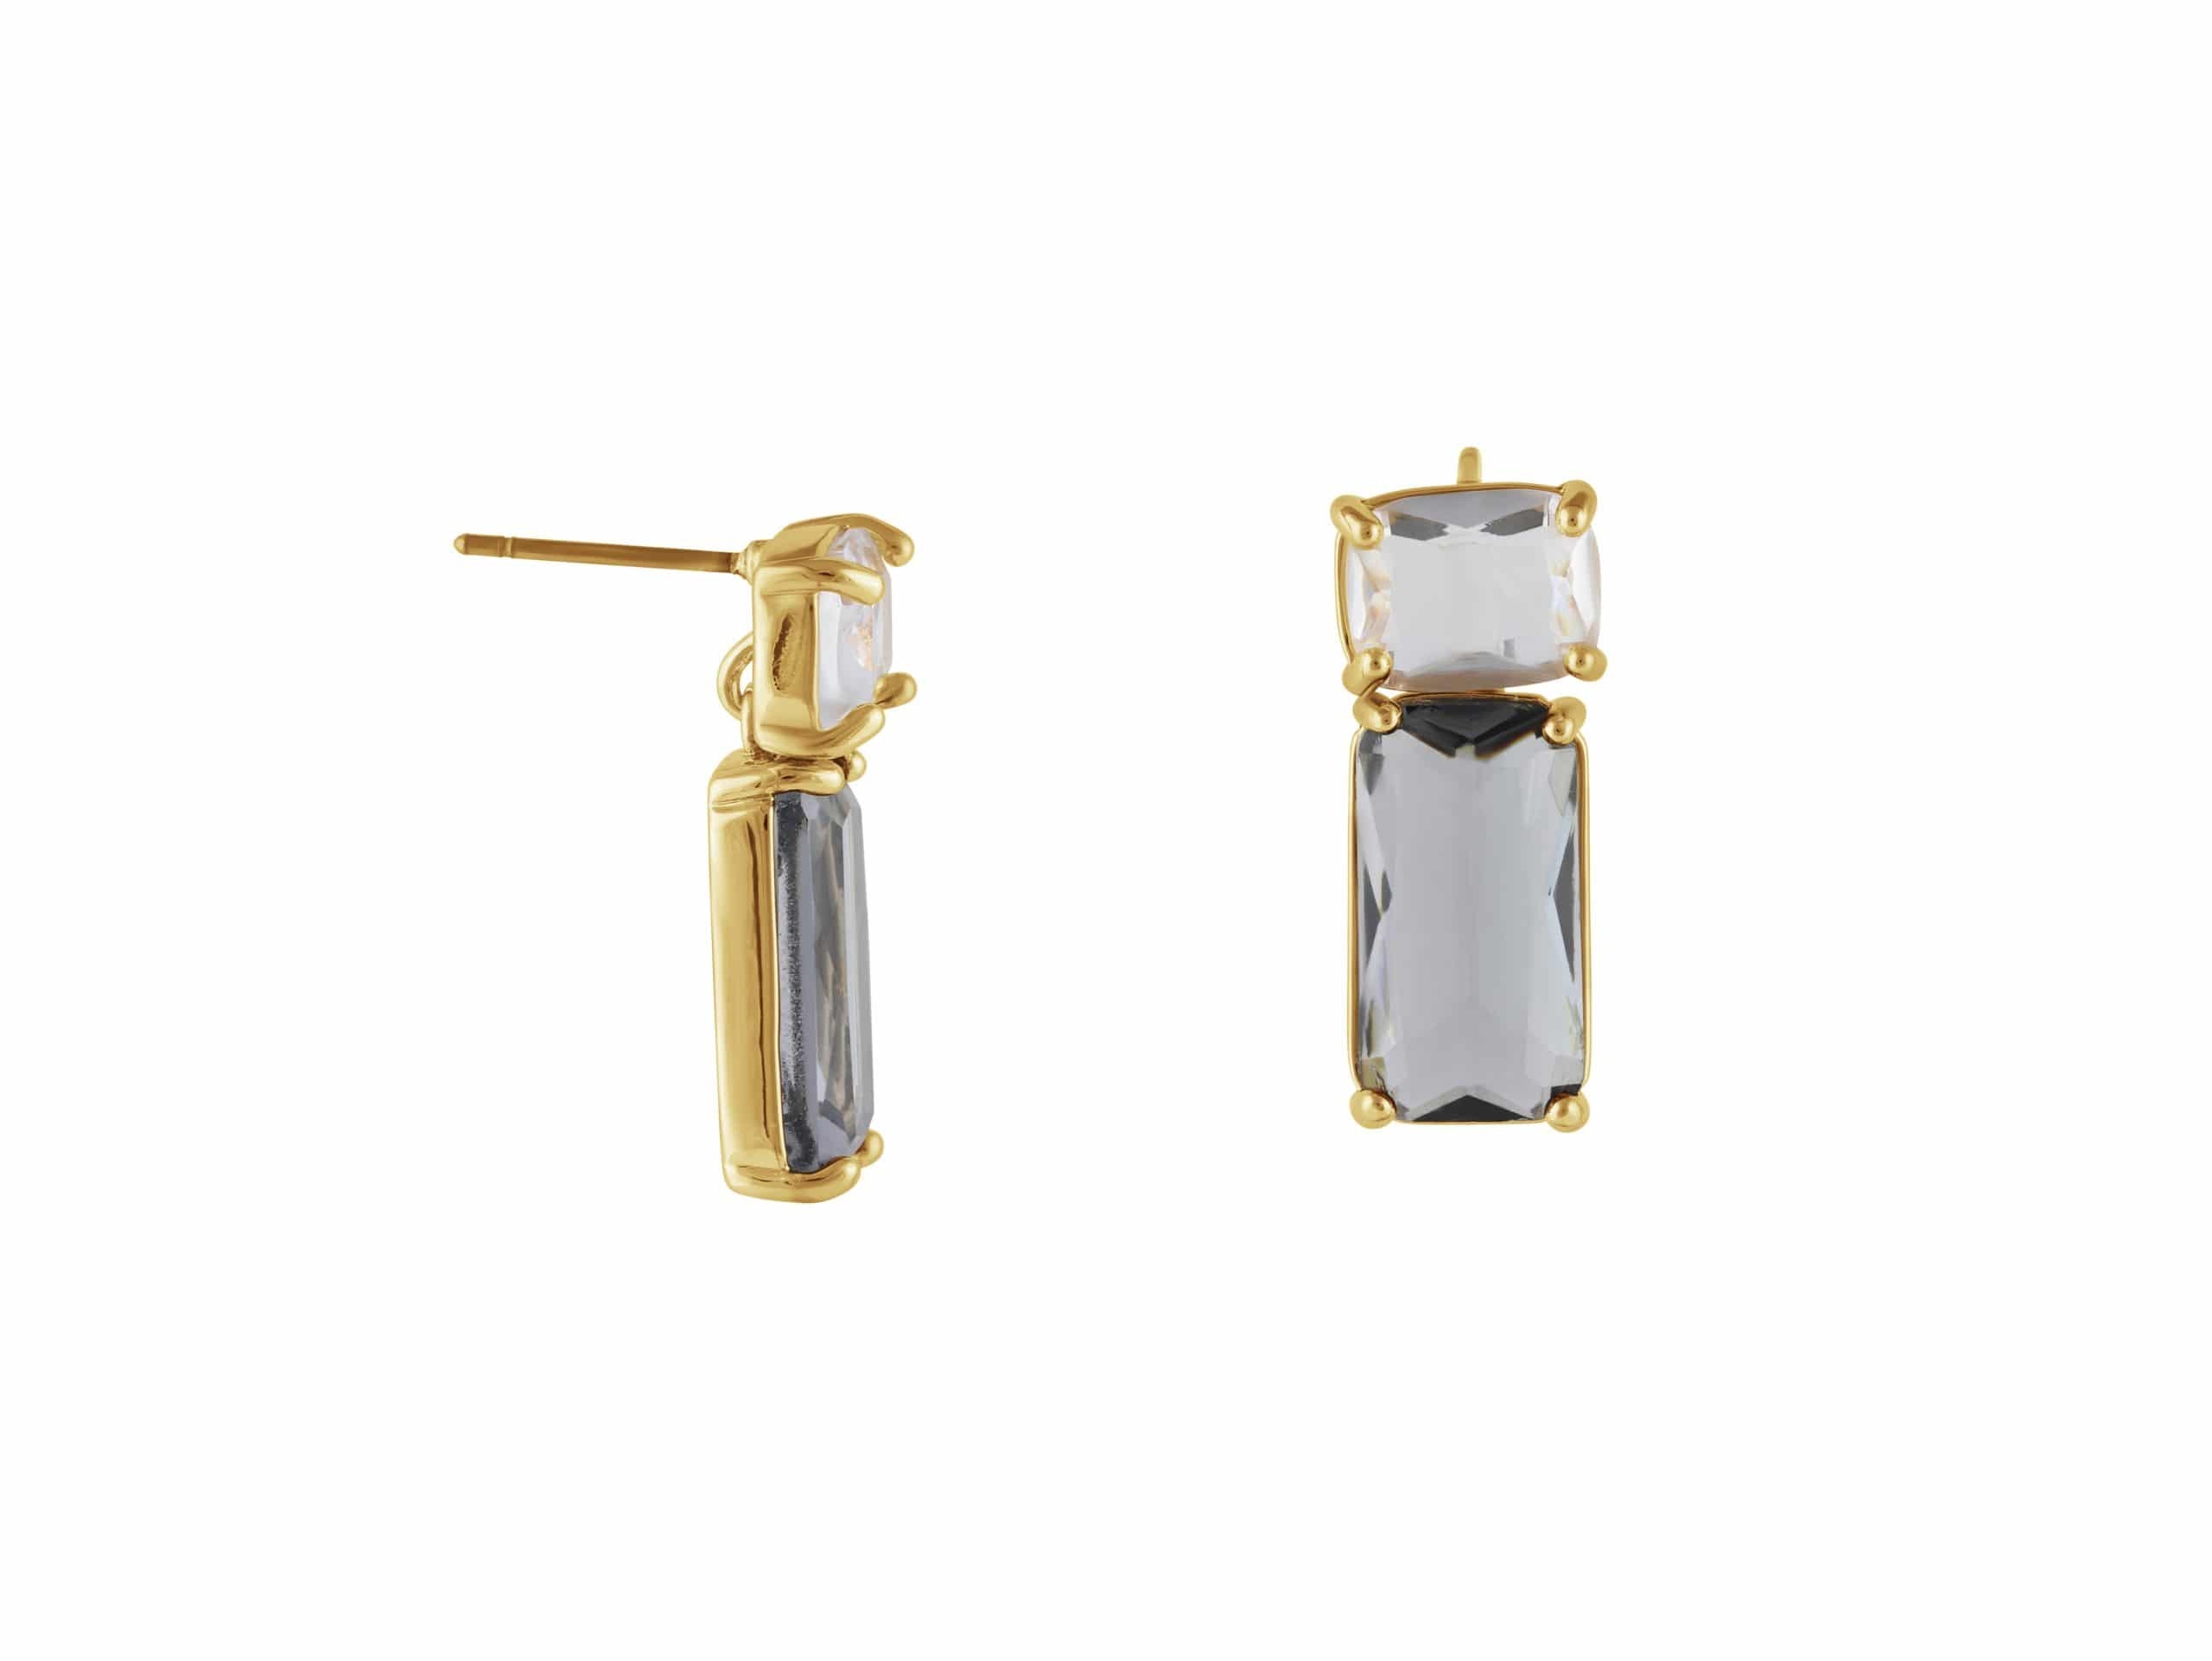 Kim Allure Stone Cut Luxe Earrings in Crystal and Blue – Big Metal London